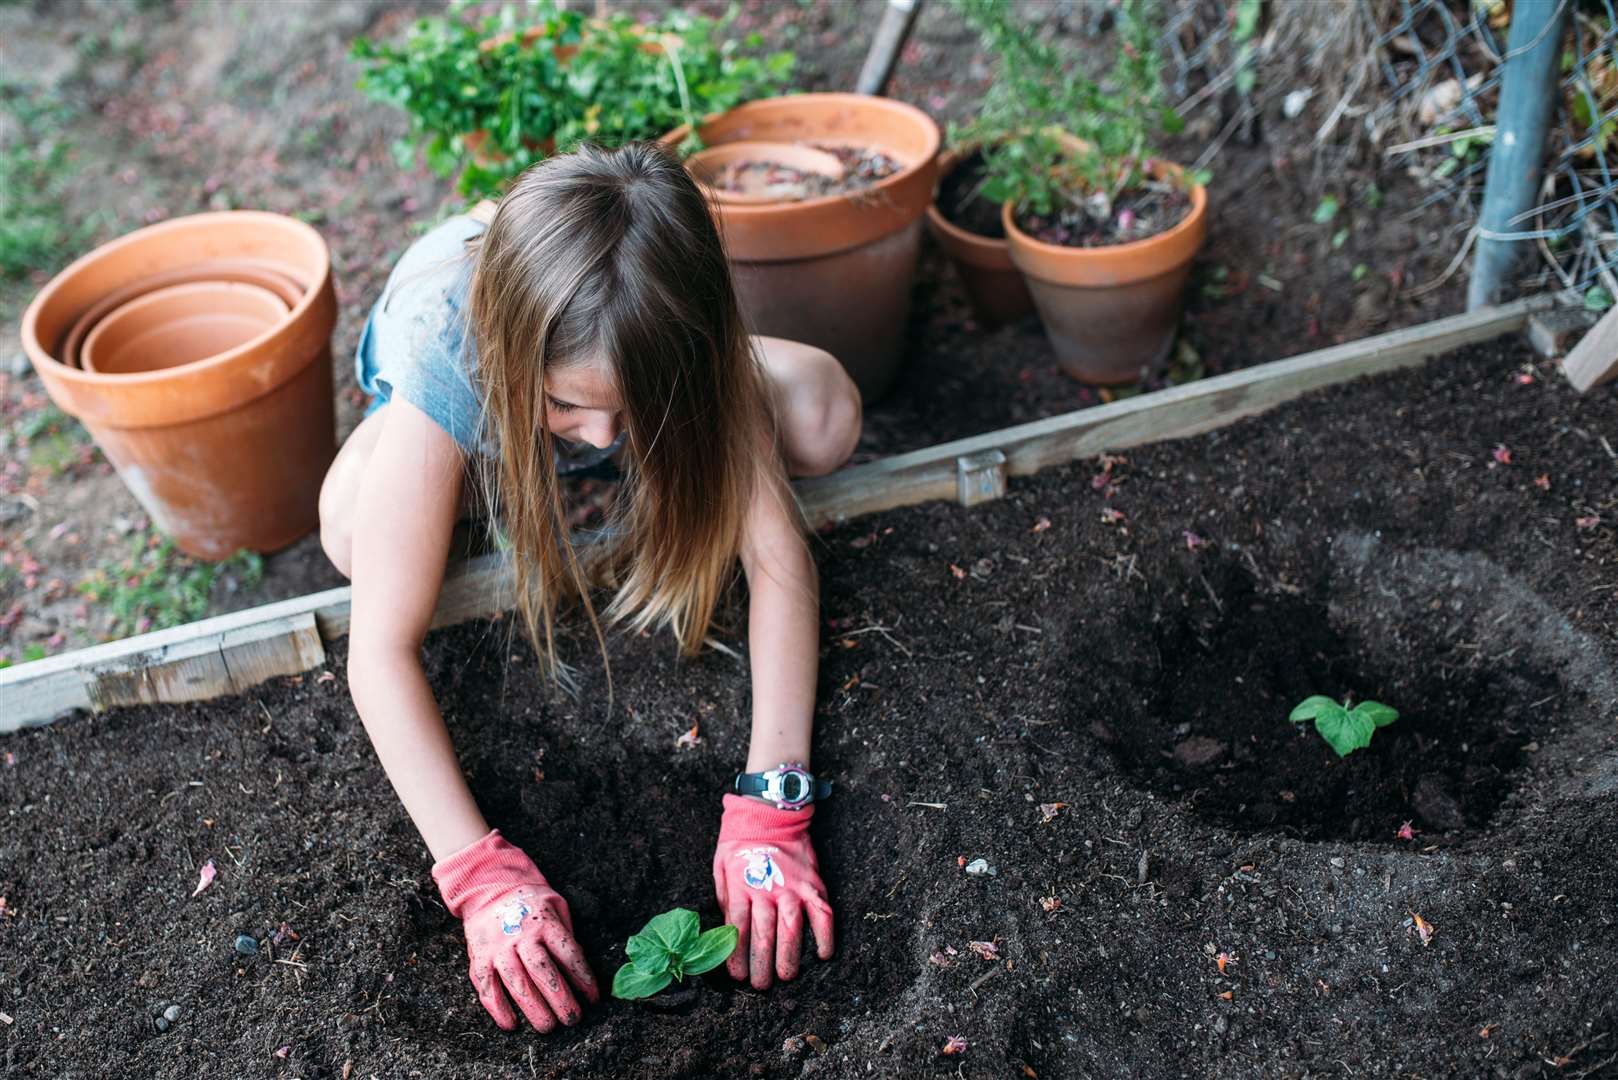 Those taking part in My Rainbow Garden will be sent a free box of vegetable plants.